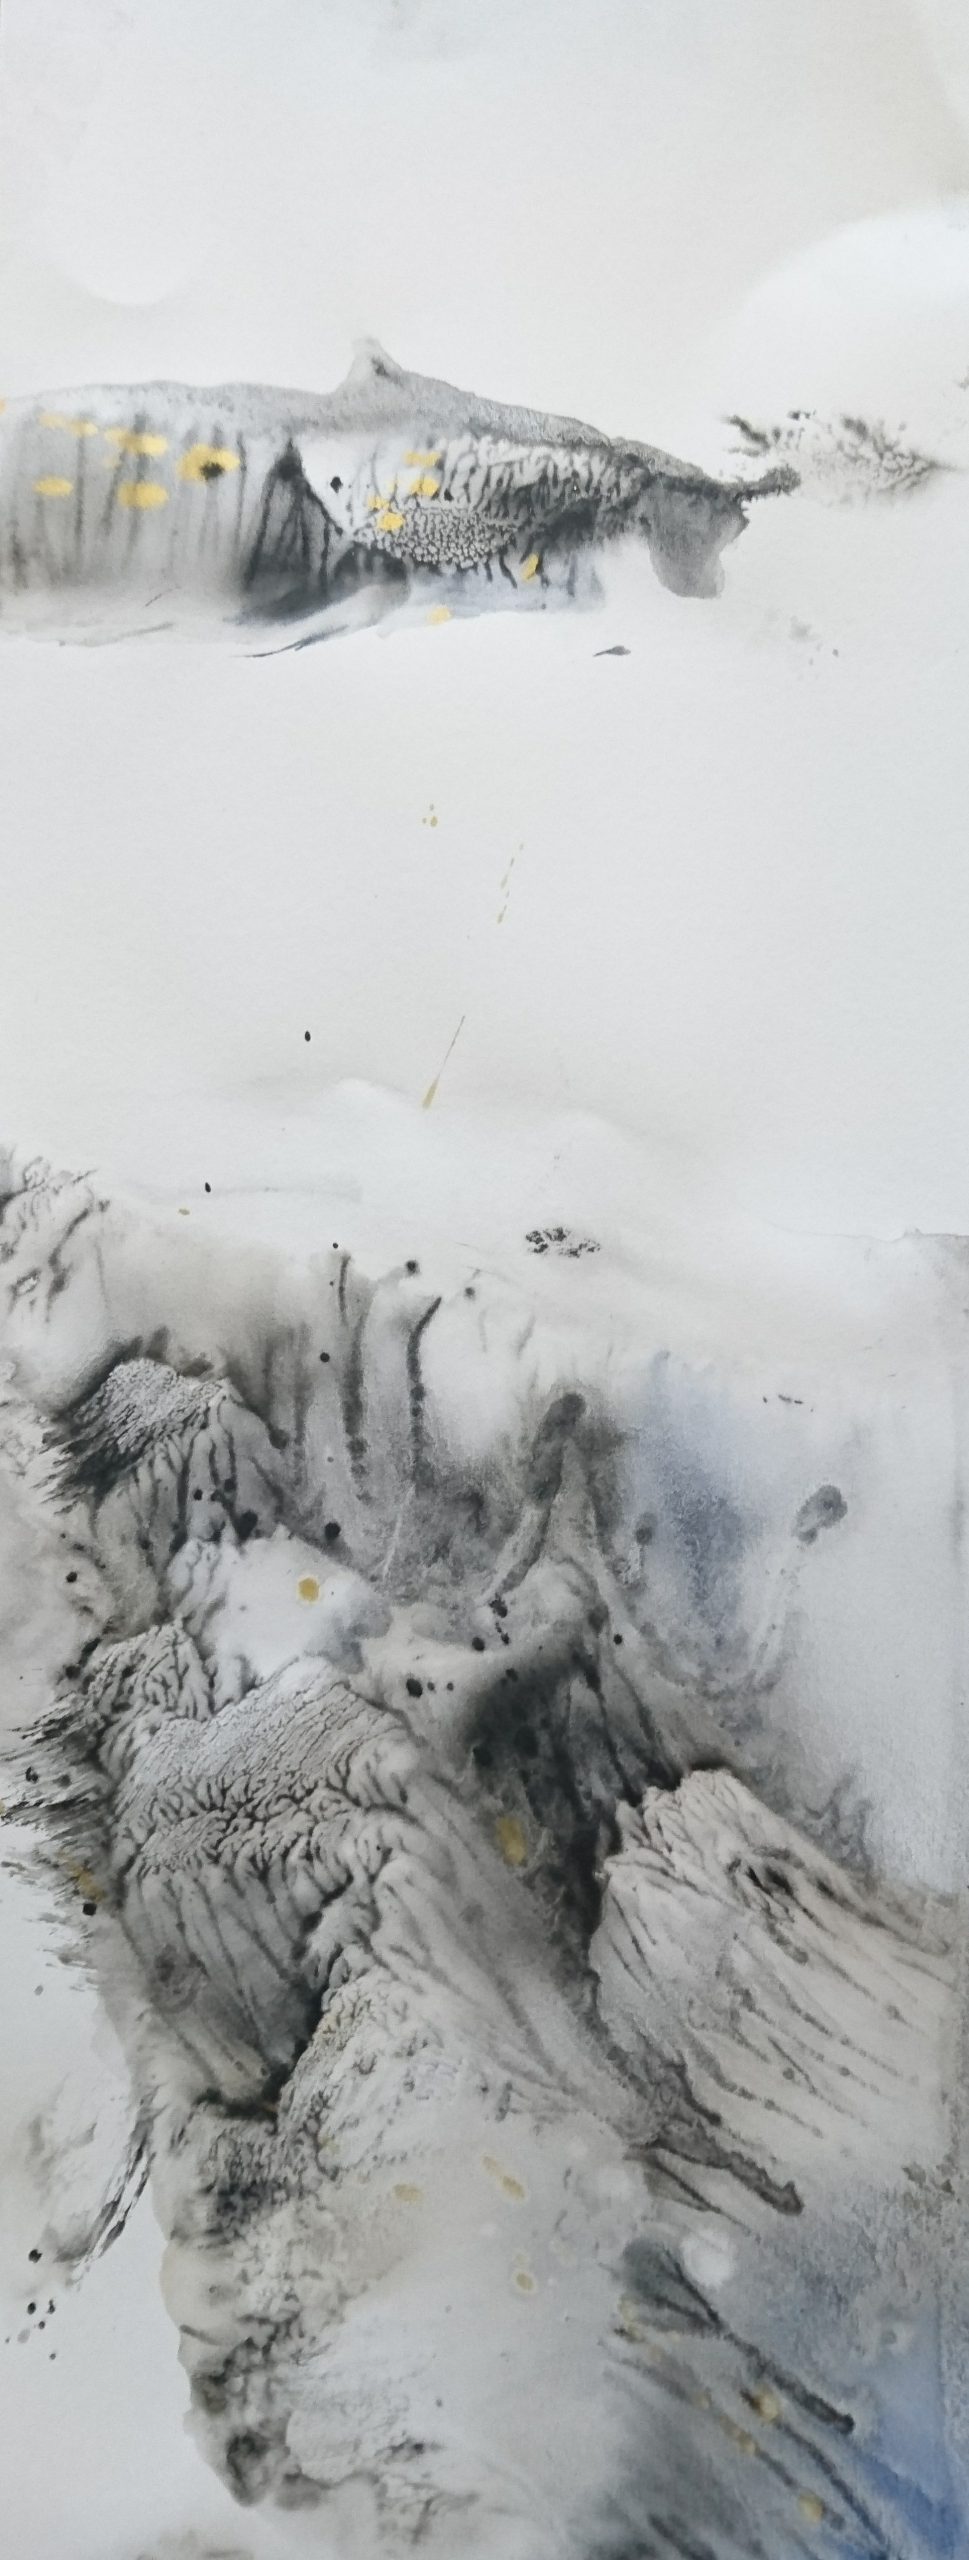 After the snow, tempera/paper/canvas, 65x25cm, 2019